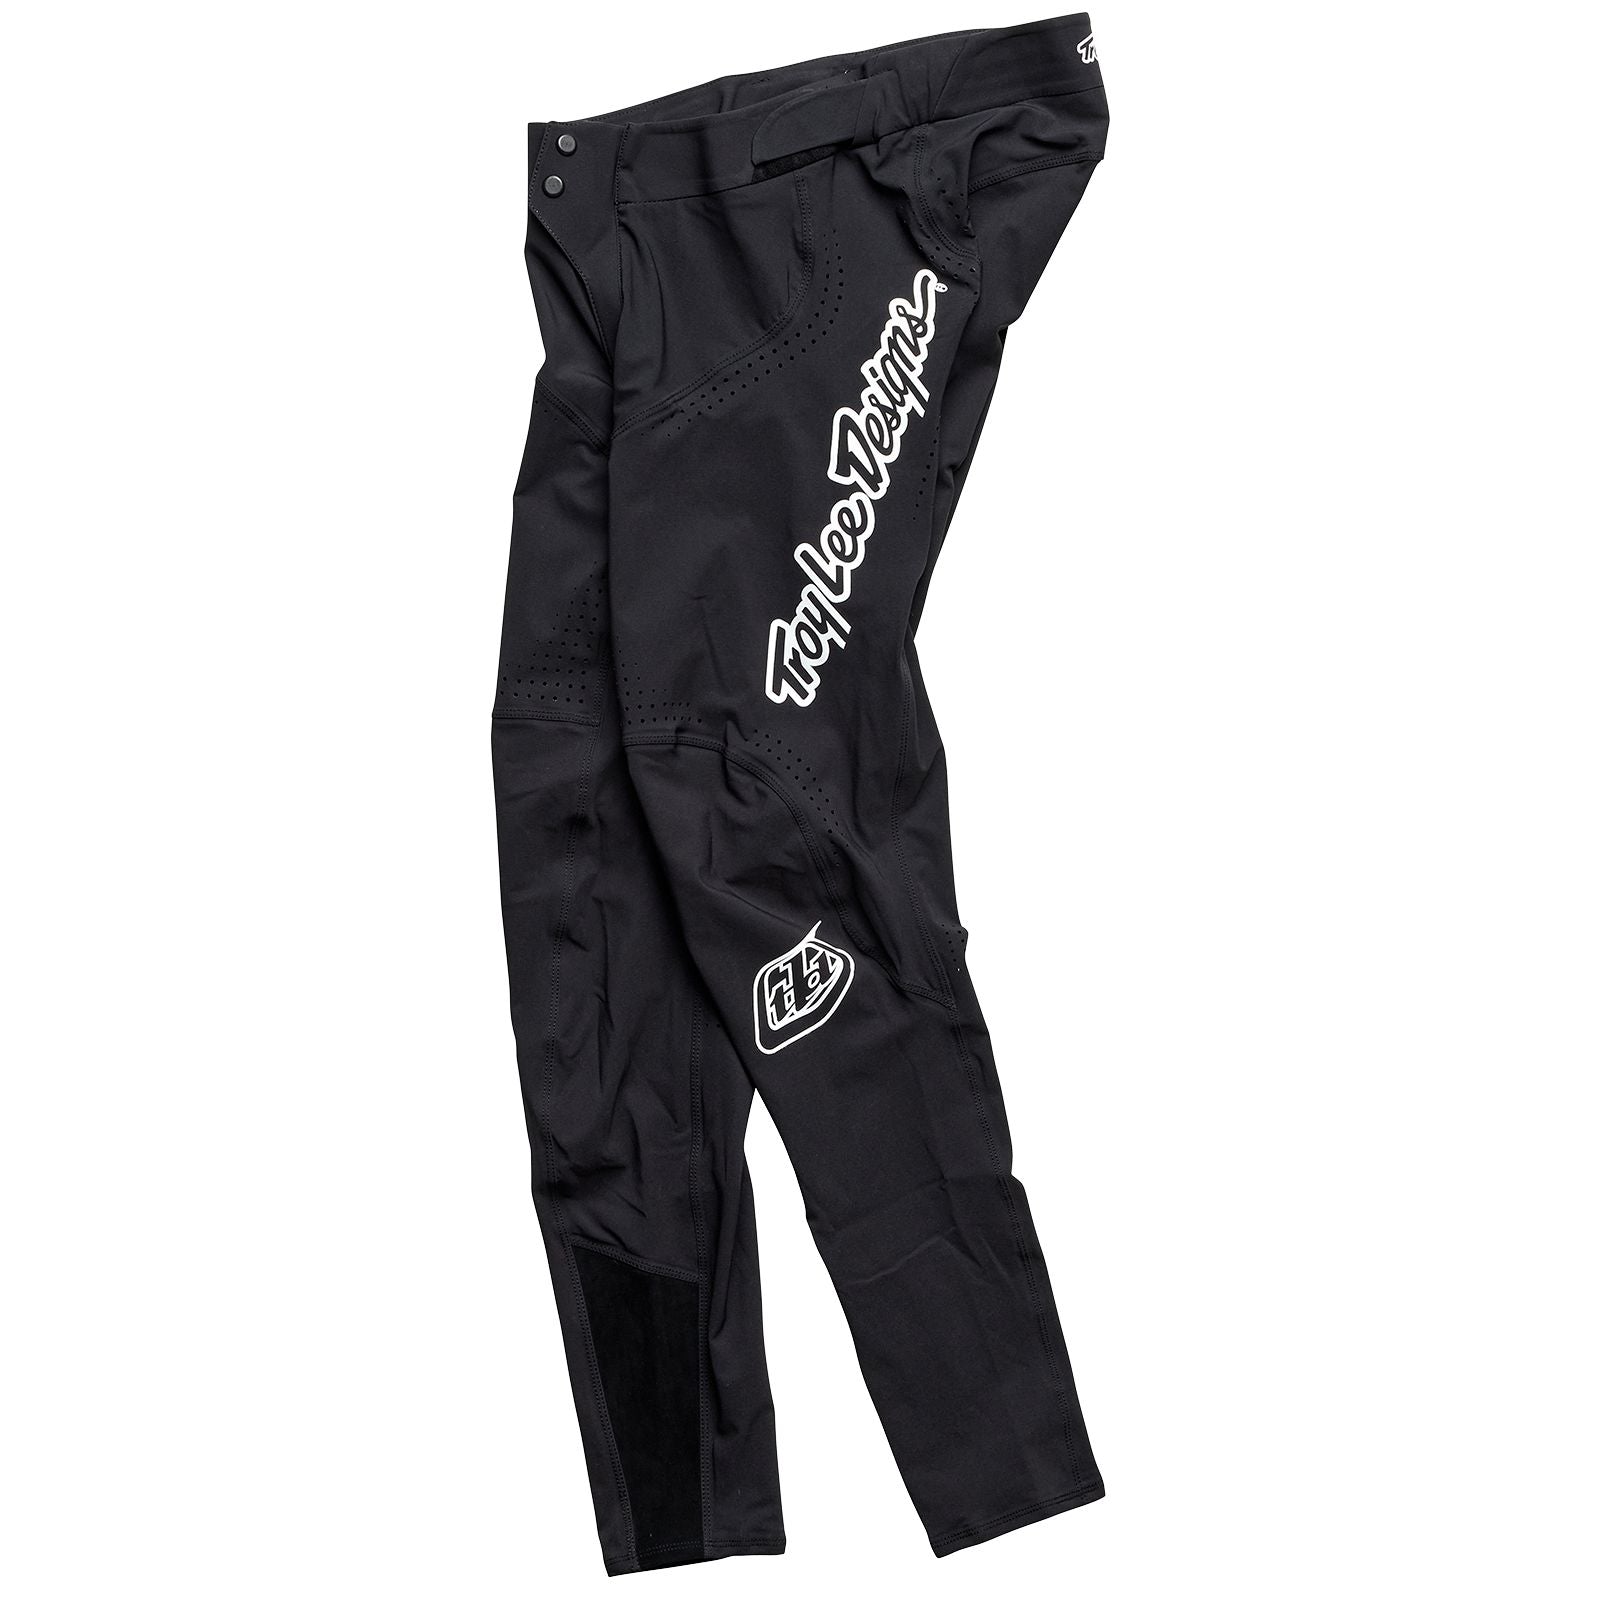 A black TLD Sprint Ultra Pant with white writing.